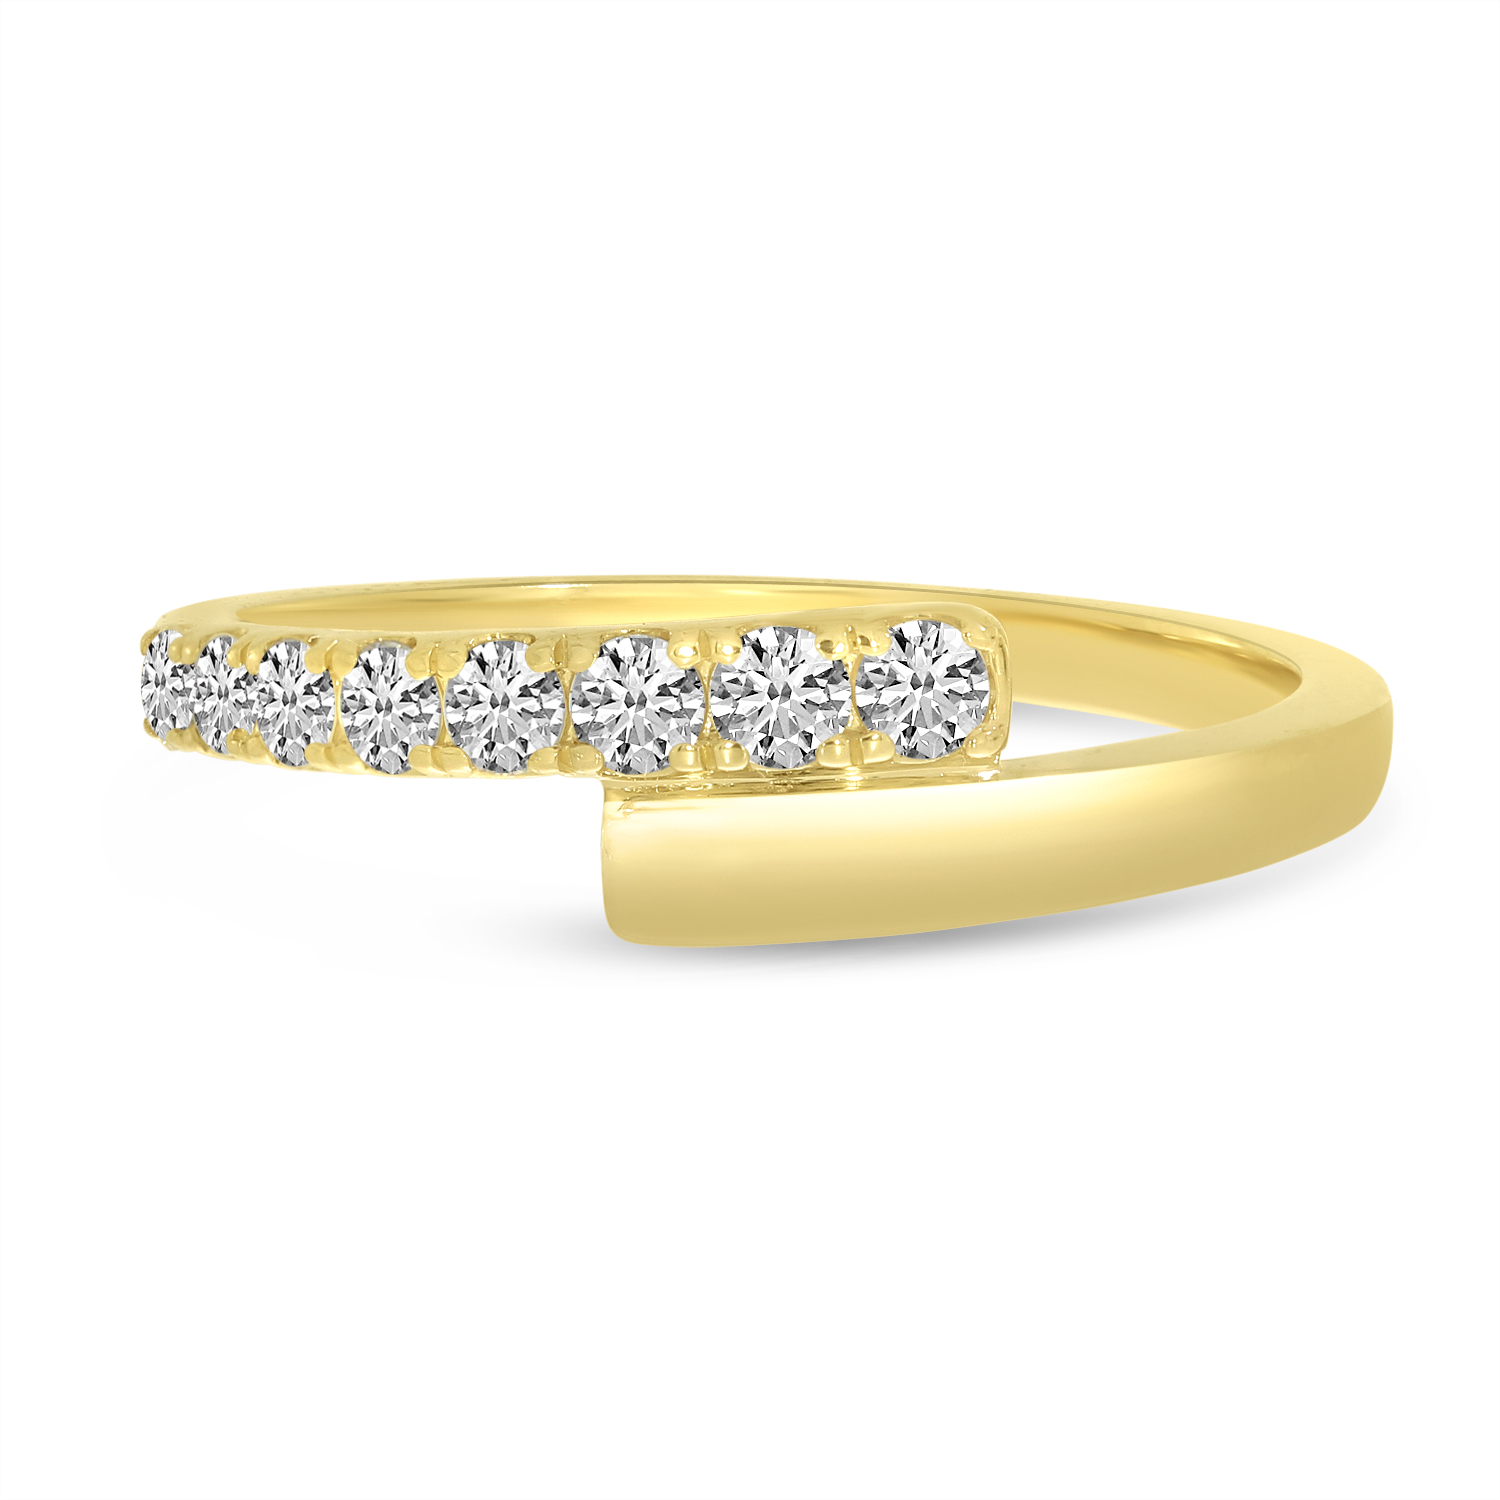 14K Yellow Gold Diamond Crossover Band Ring